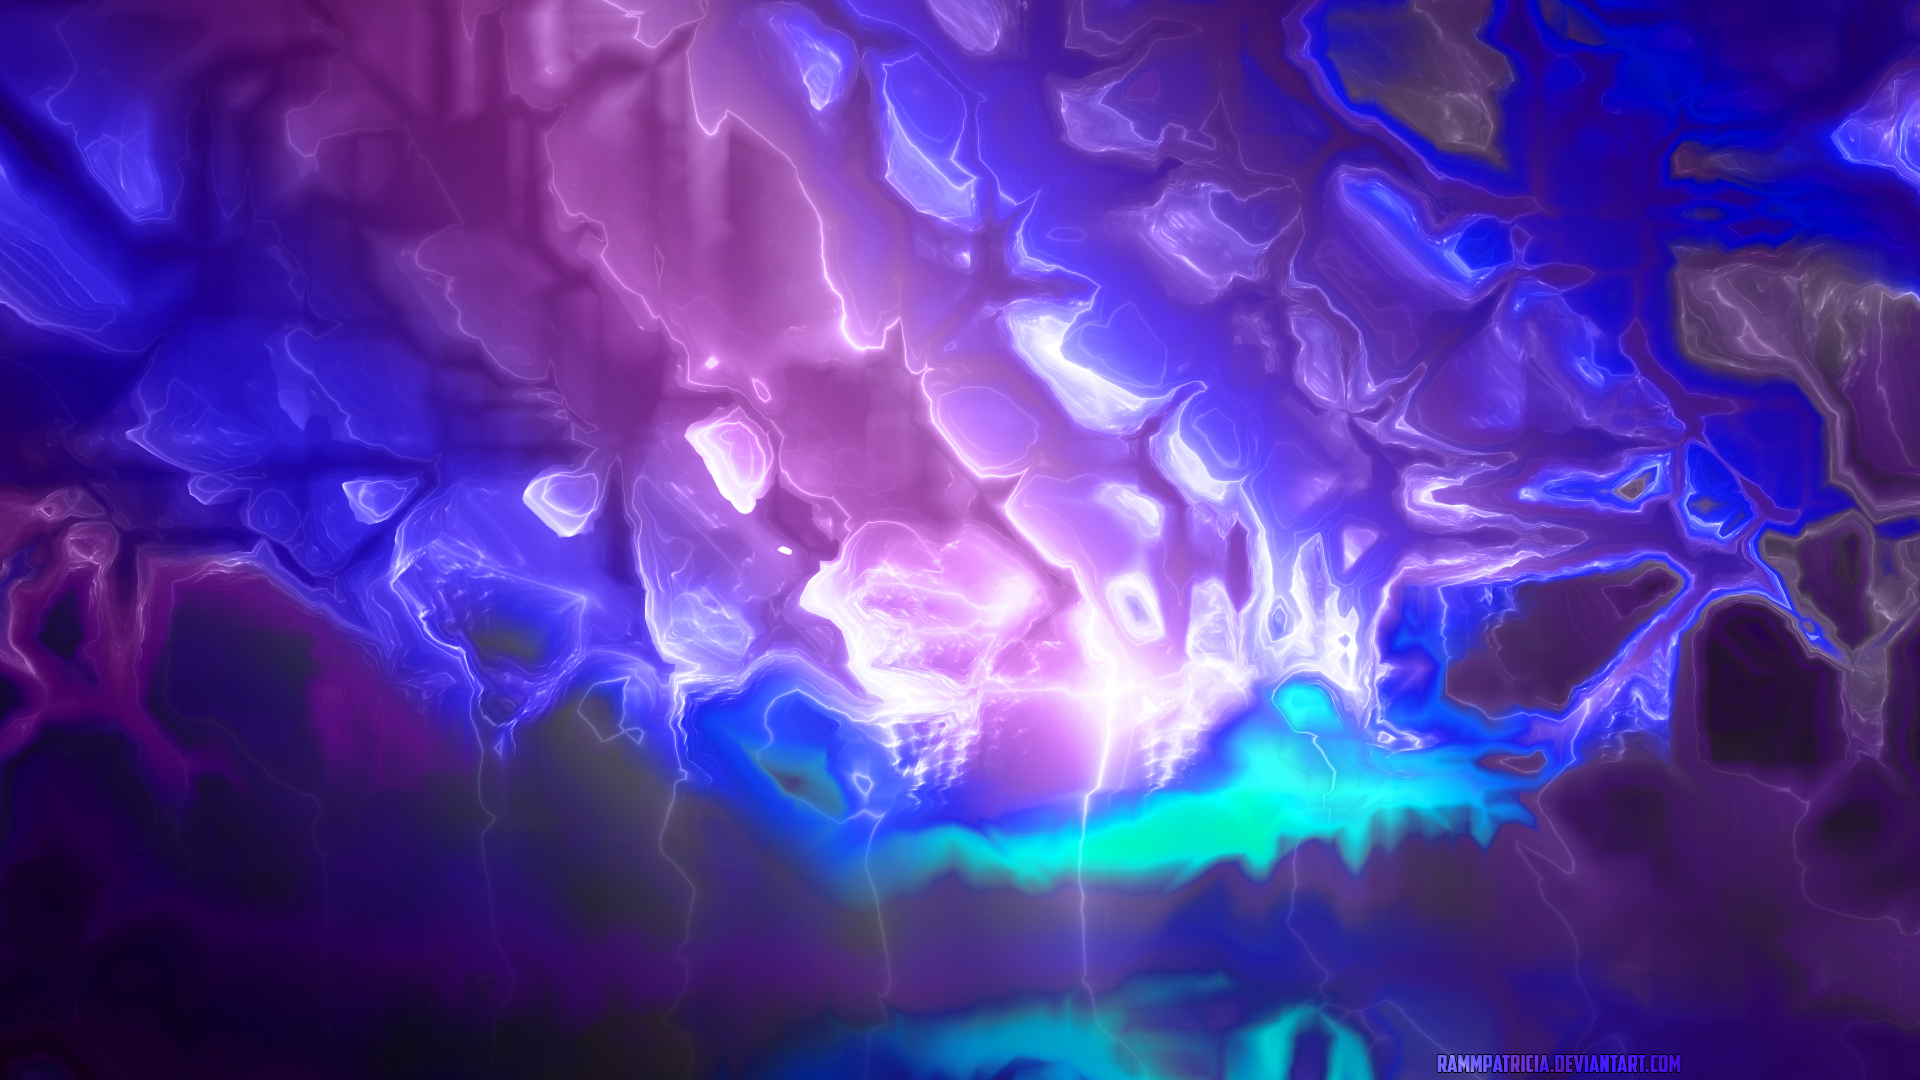 Abstract Colorful Storm Melting RammPatricia Watermarked Digital Art 1920x1080